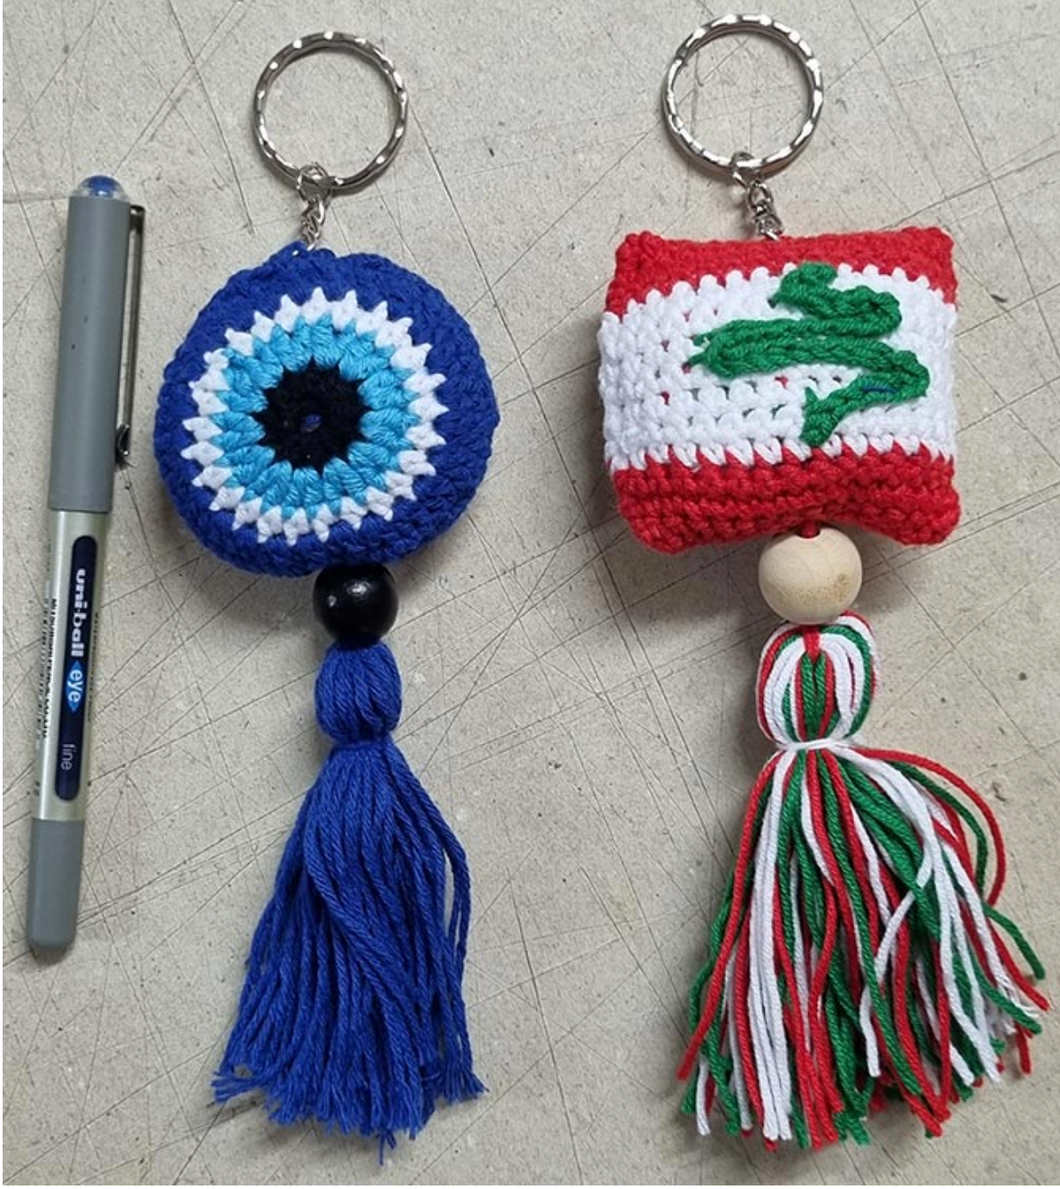 Hand-knitted Embroidery Key Rings